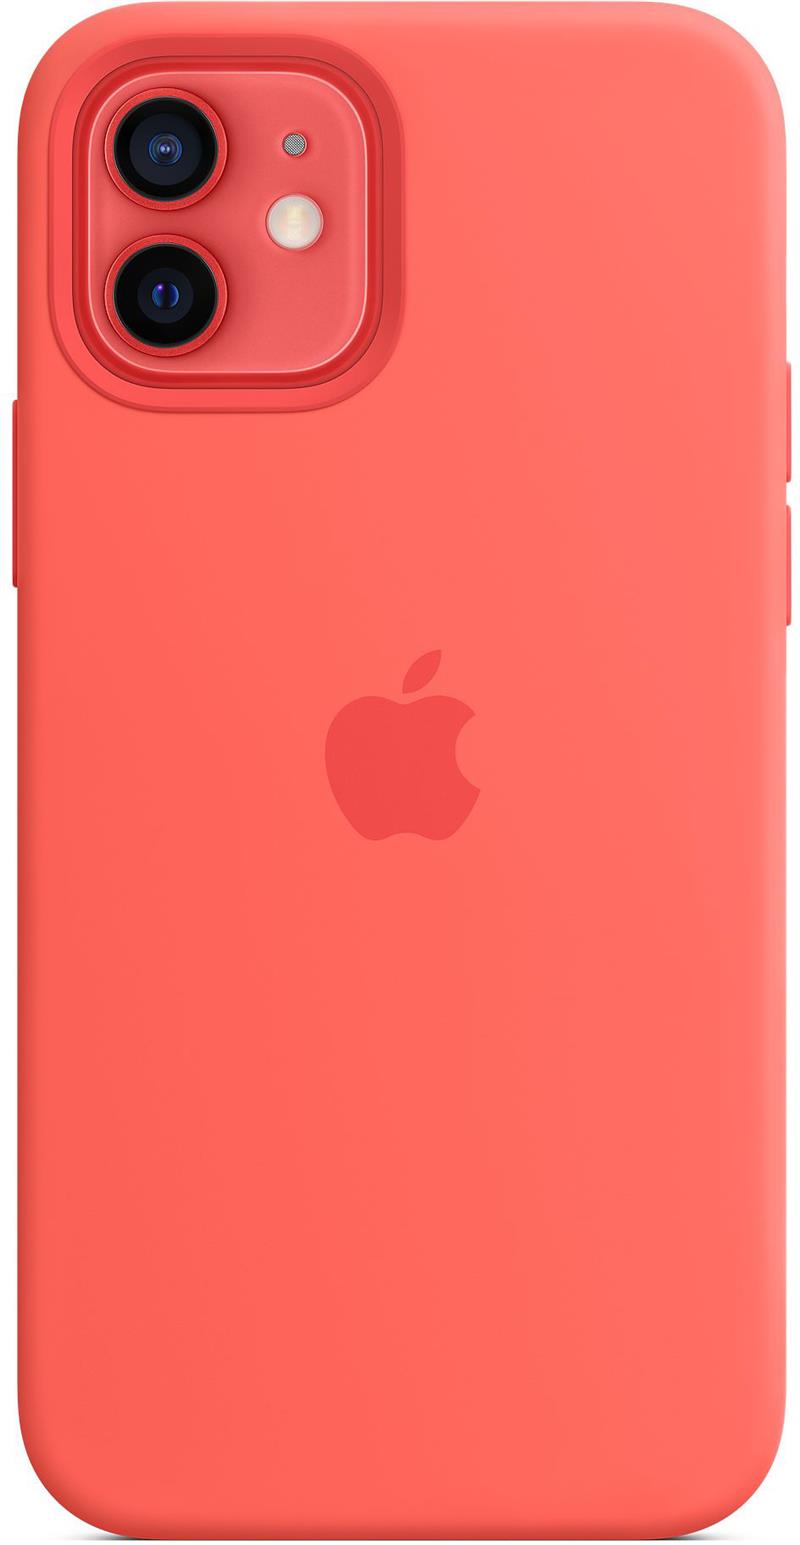 Apple iPhone 12 12 Pro Silicone Case with MagSafe Citrus Pink 